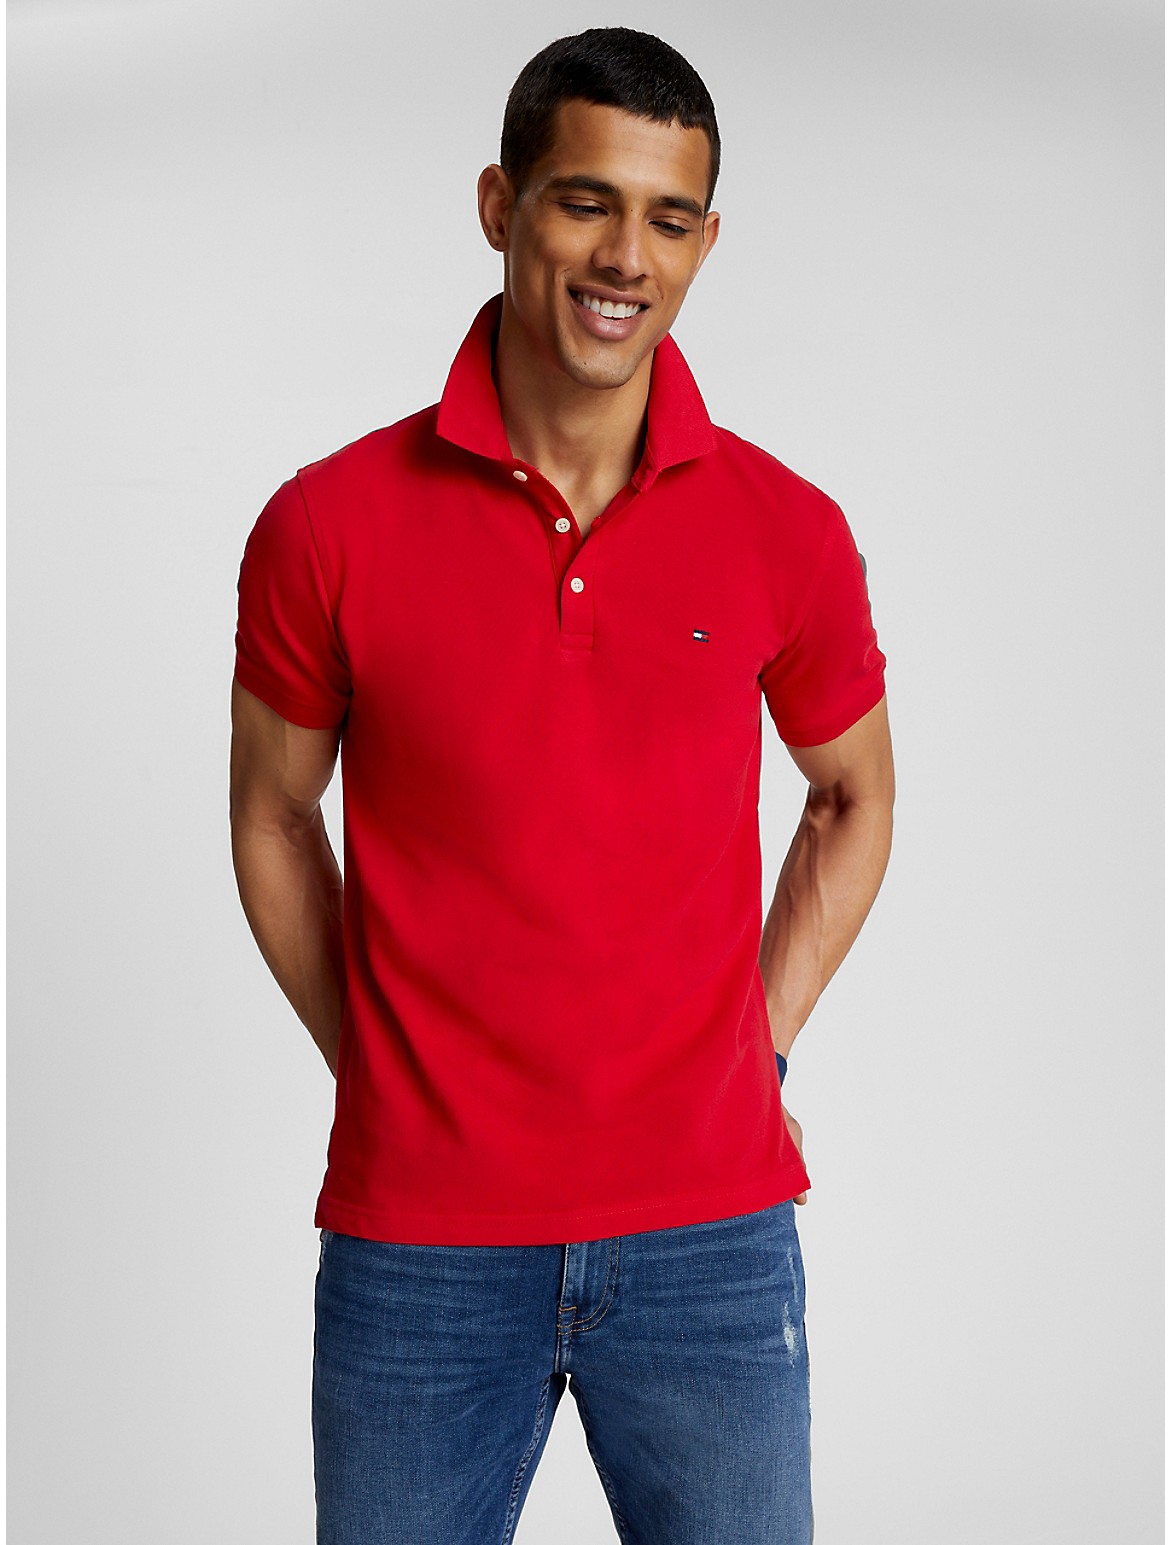 Tommy Hilfiger Men's Slim Fit Tommy Polo - Red - L